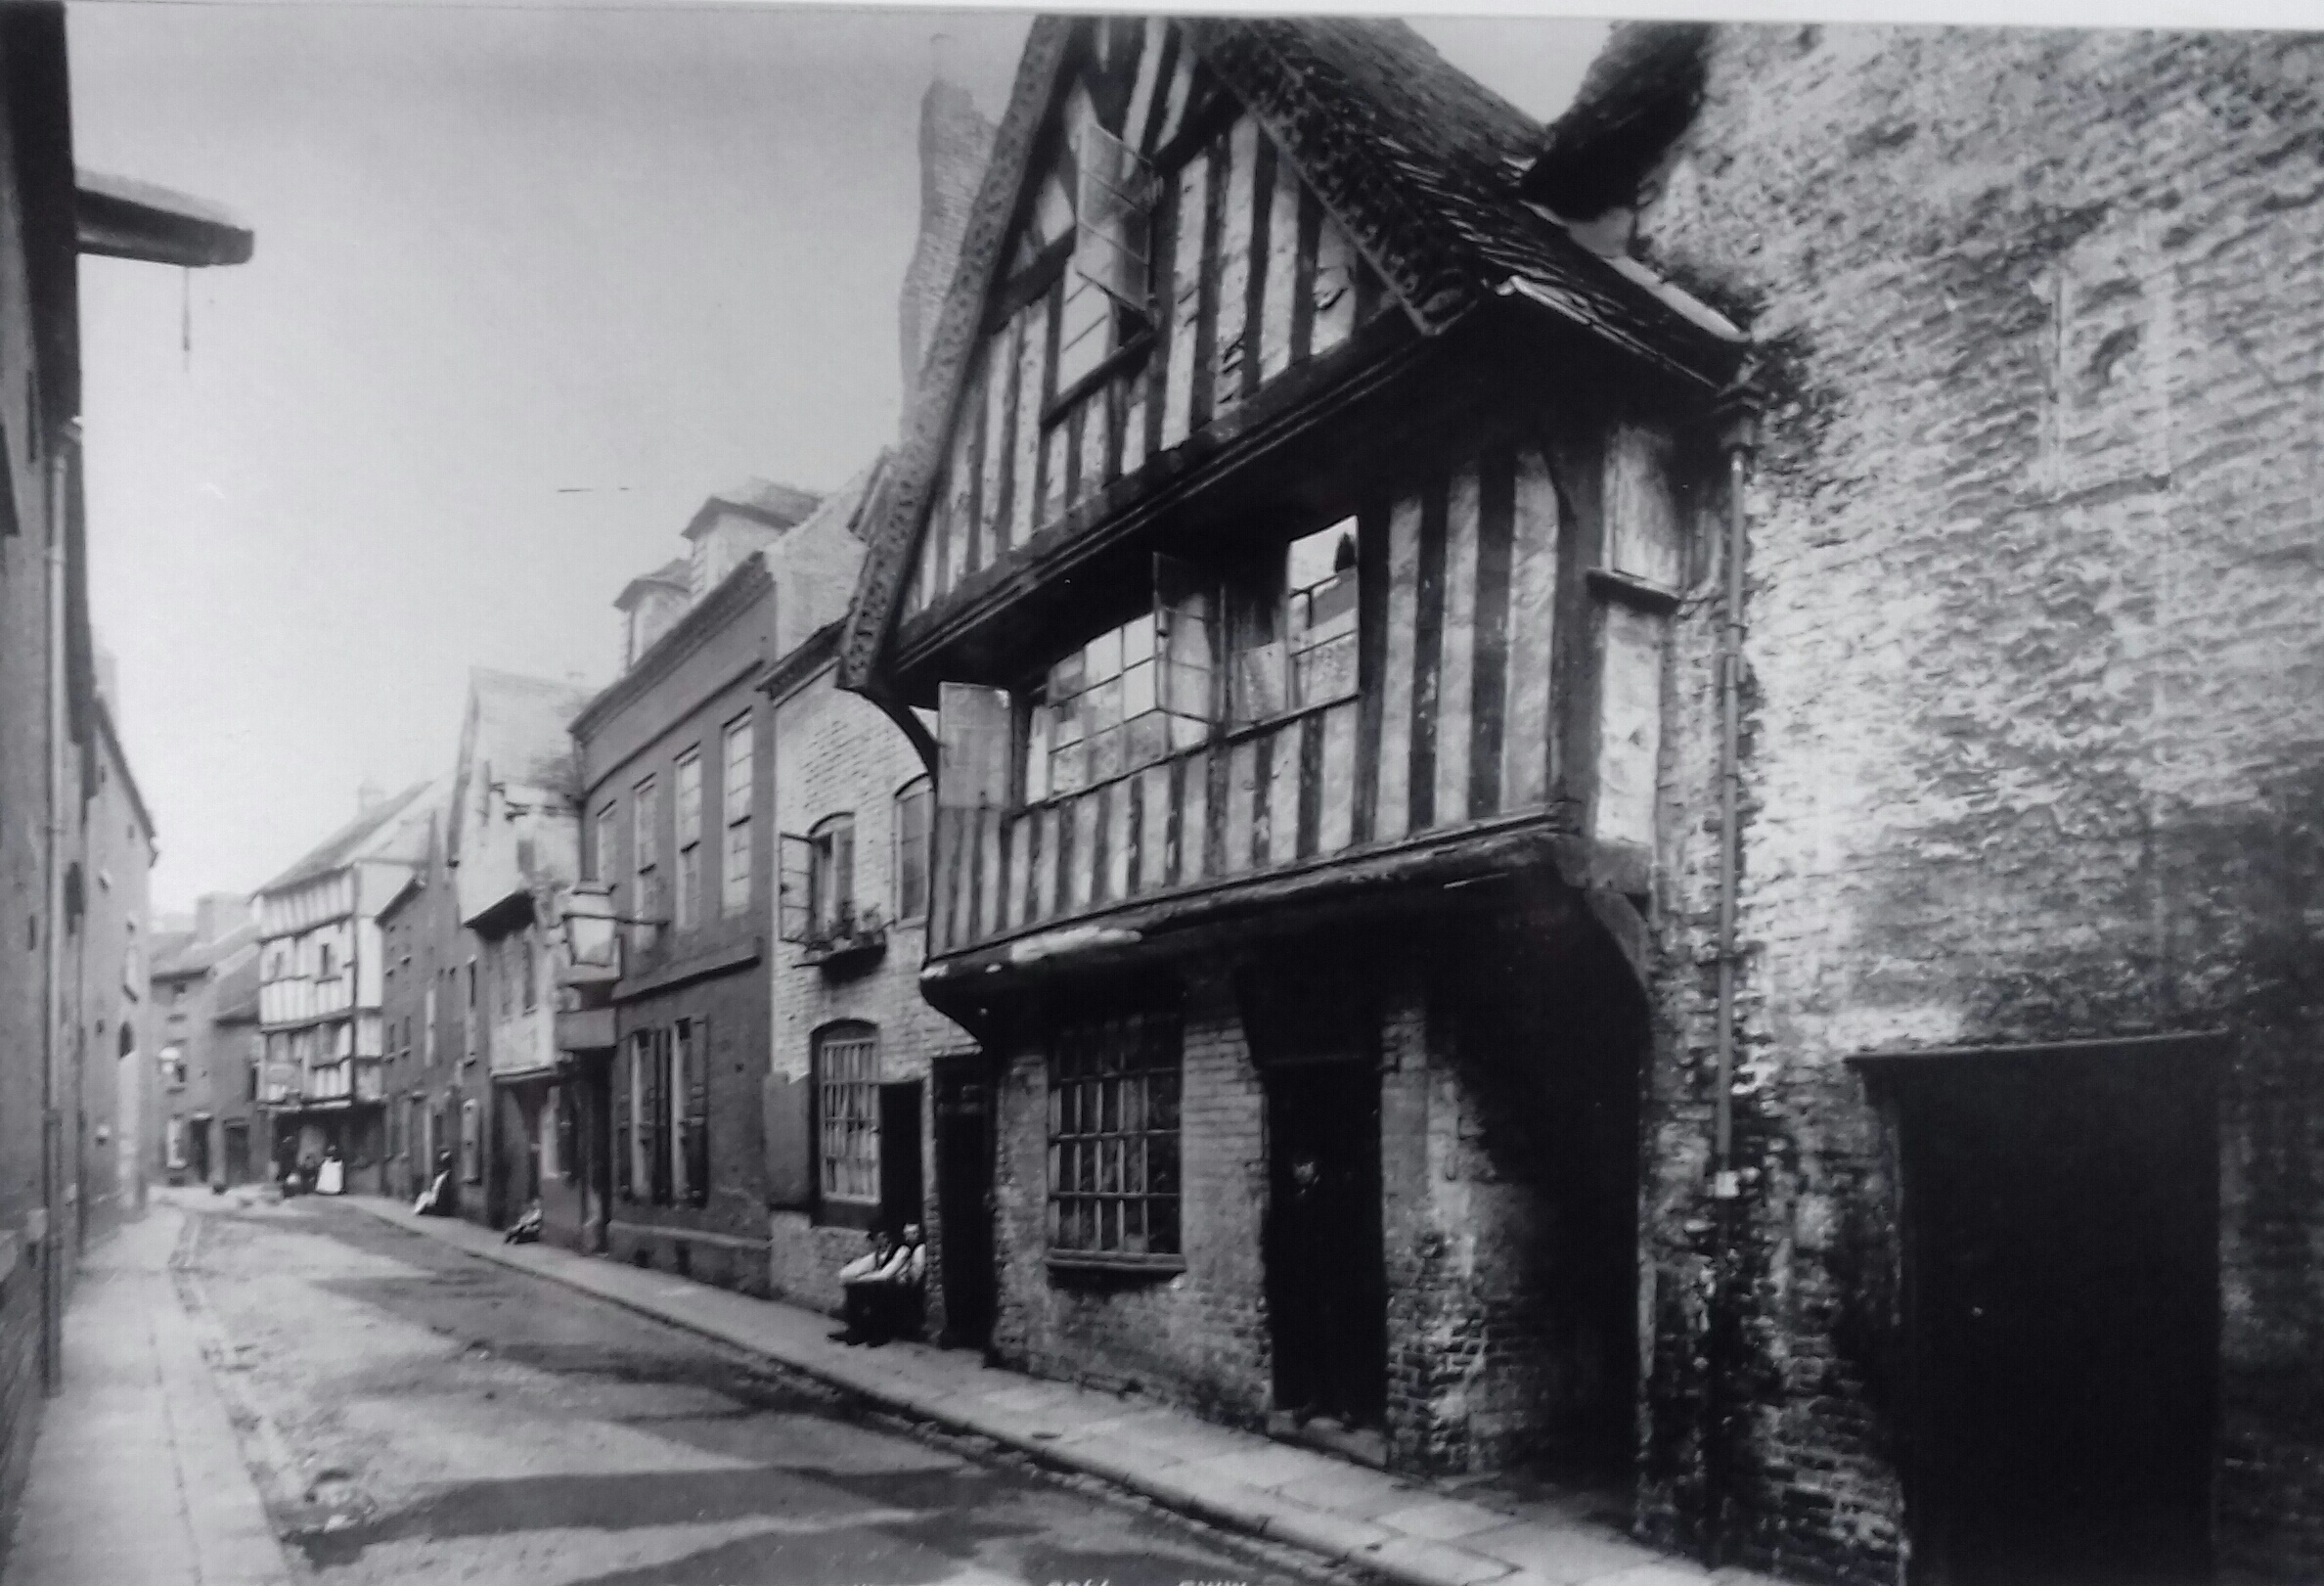 Fish Street in 1893. The property in the foreground was built in the 1600s and demolished in 1906